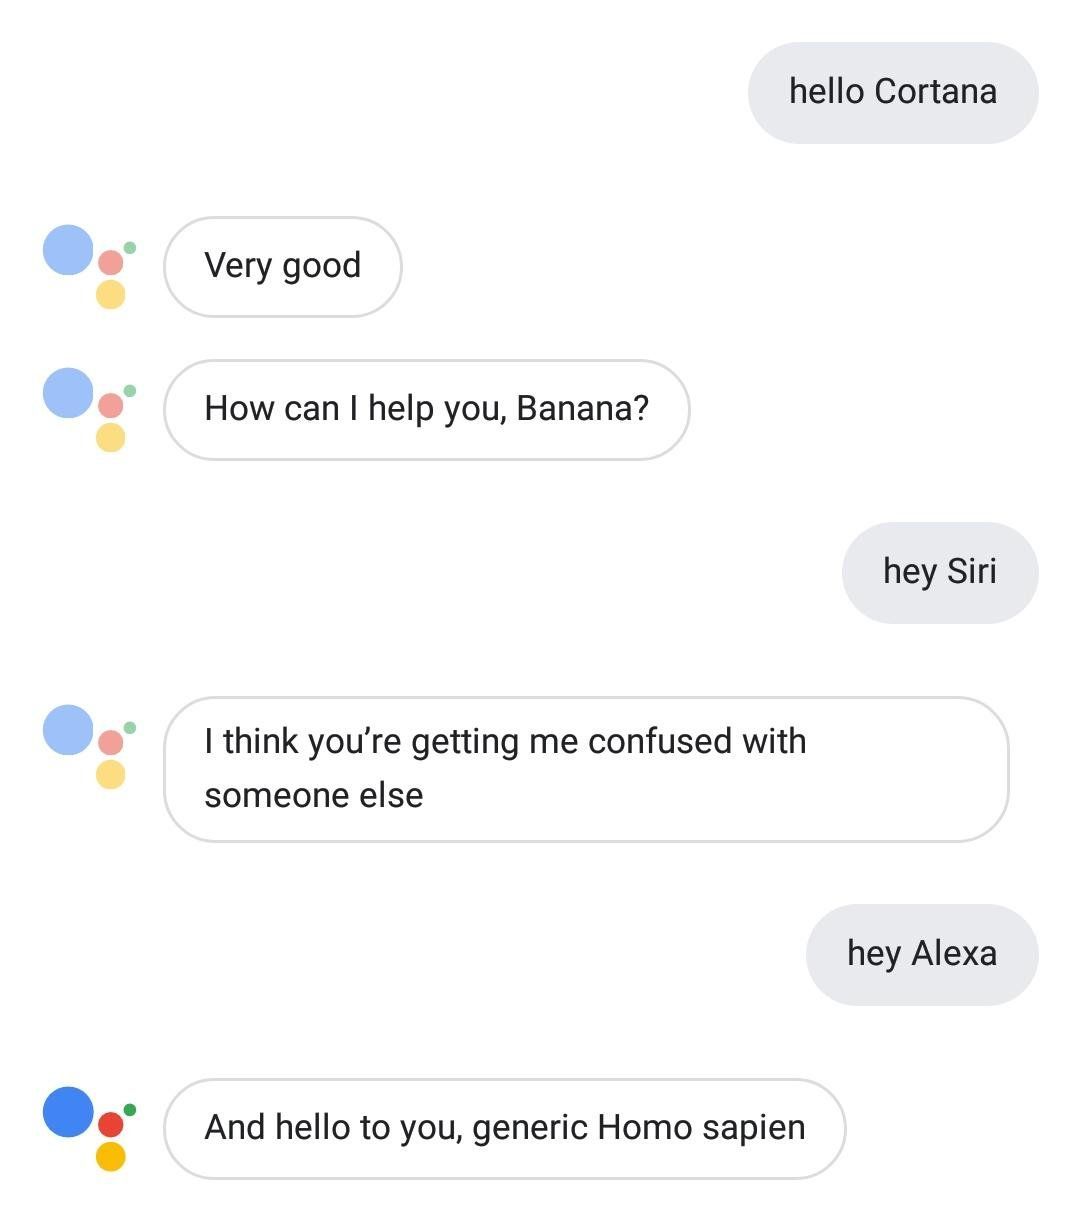 Google Assistant apparently doesn't like being called other AI's names